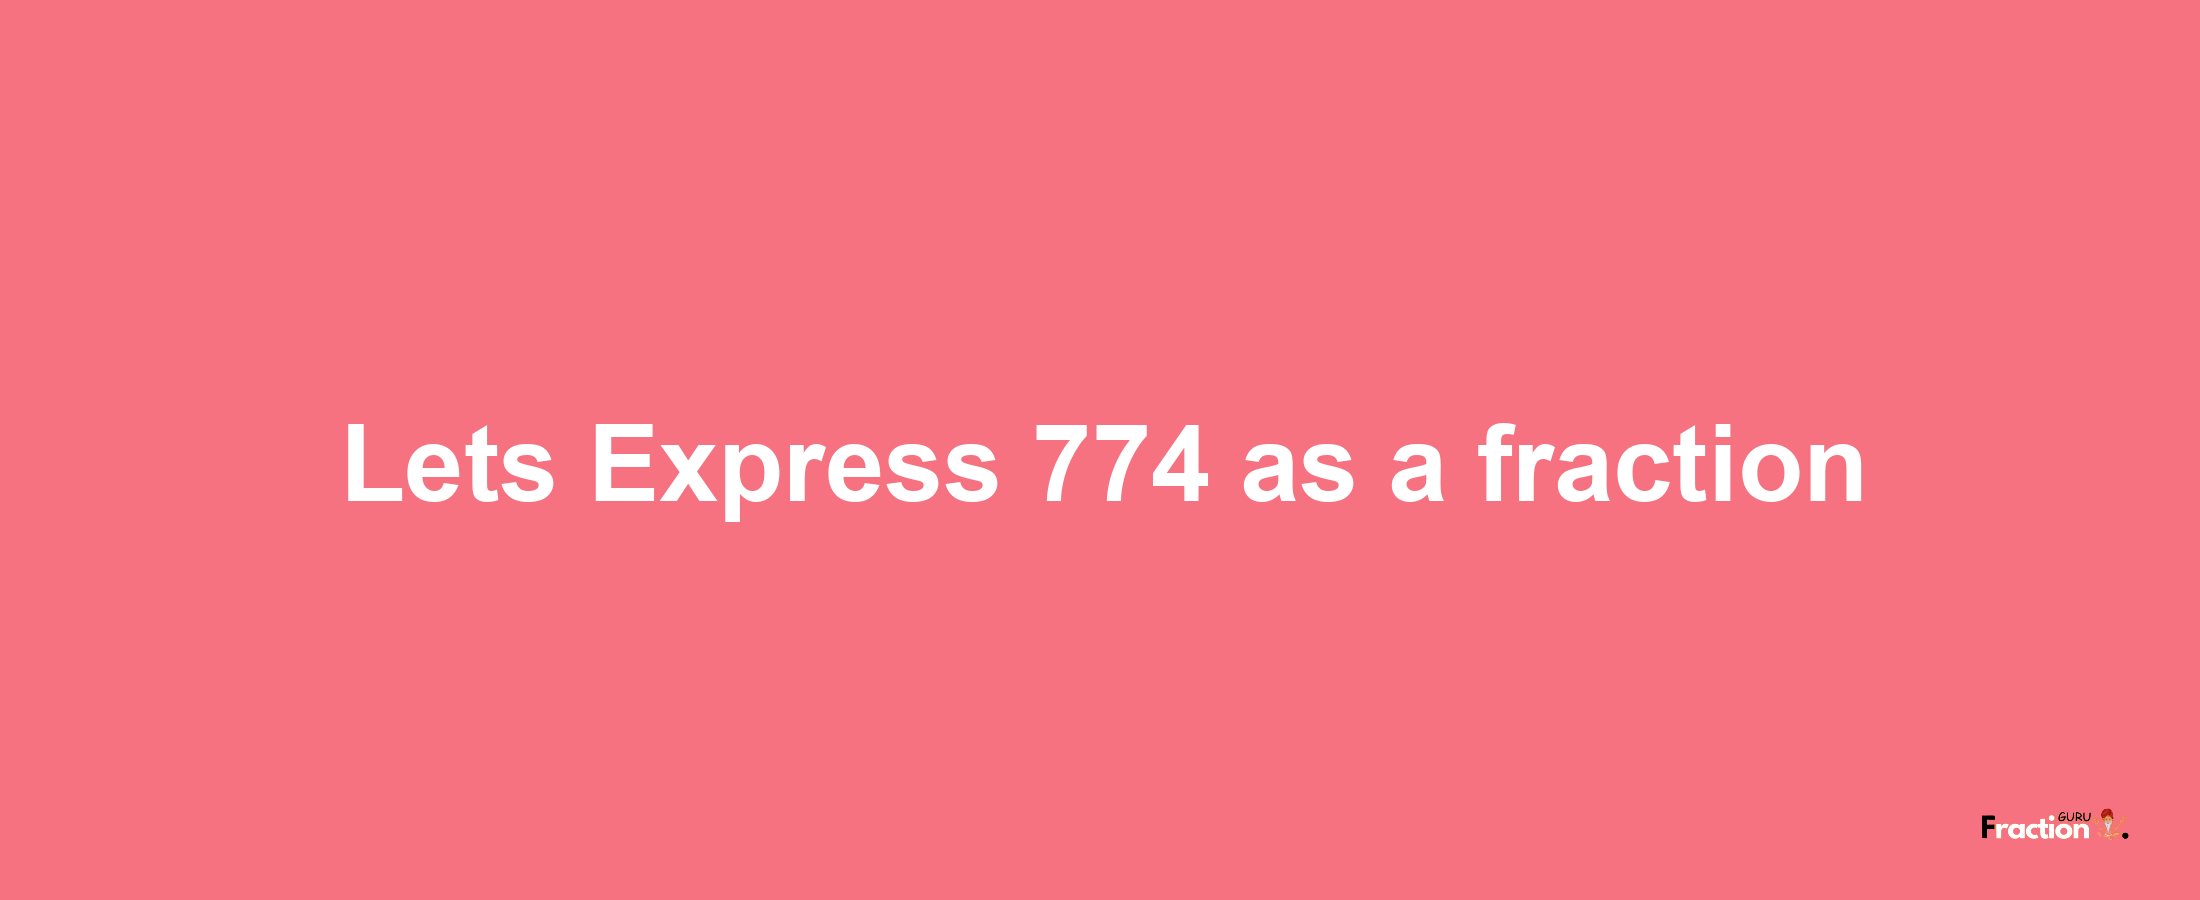 Lets Express 774 as afraction